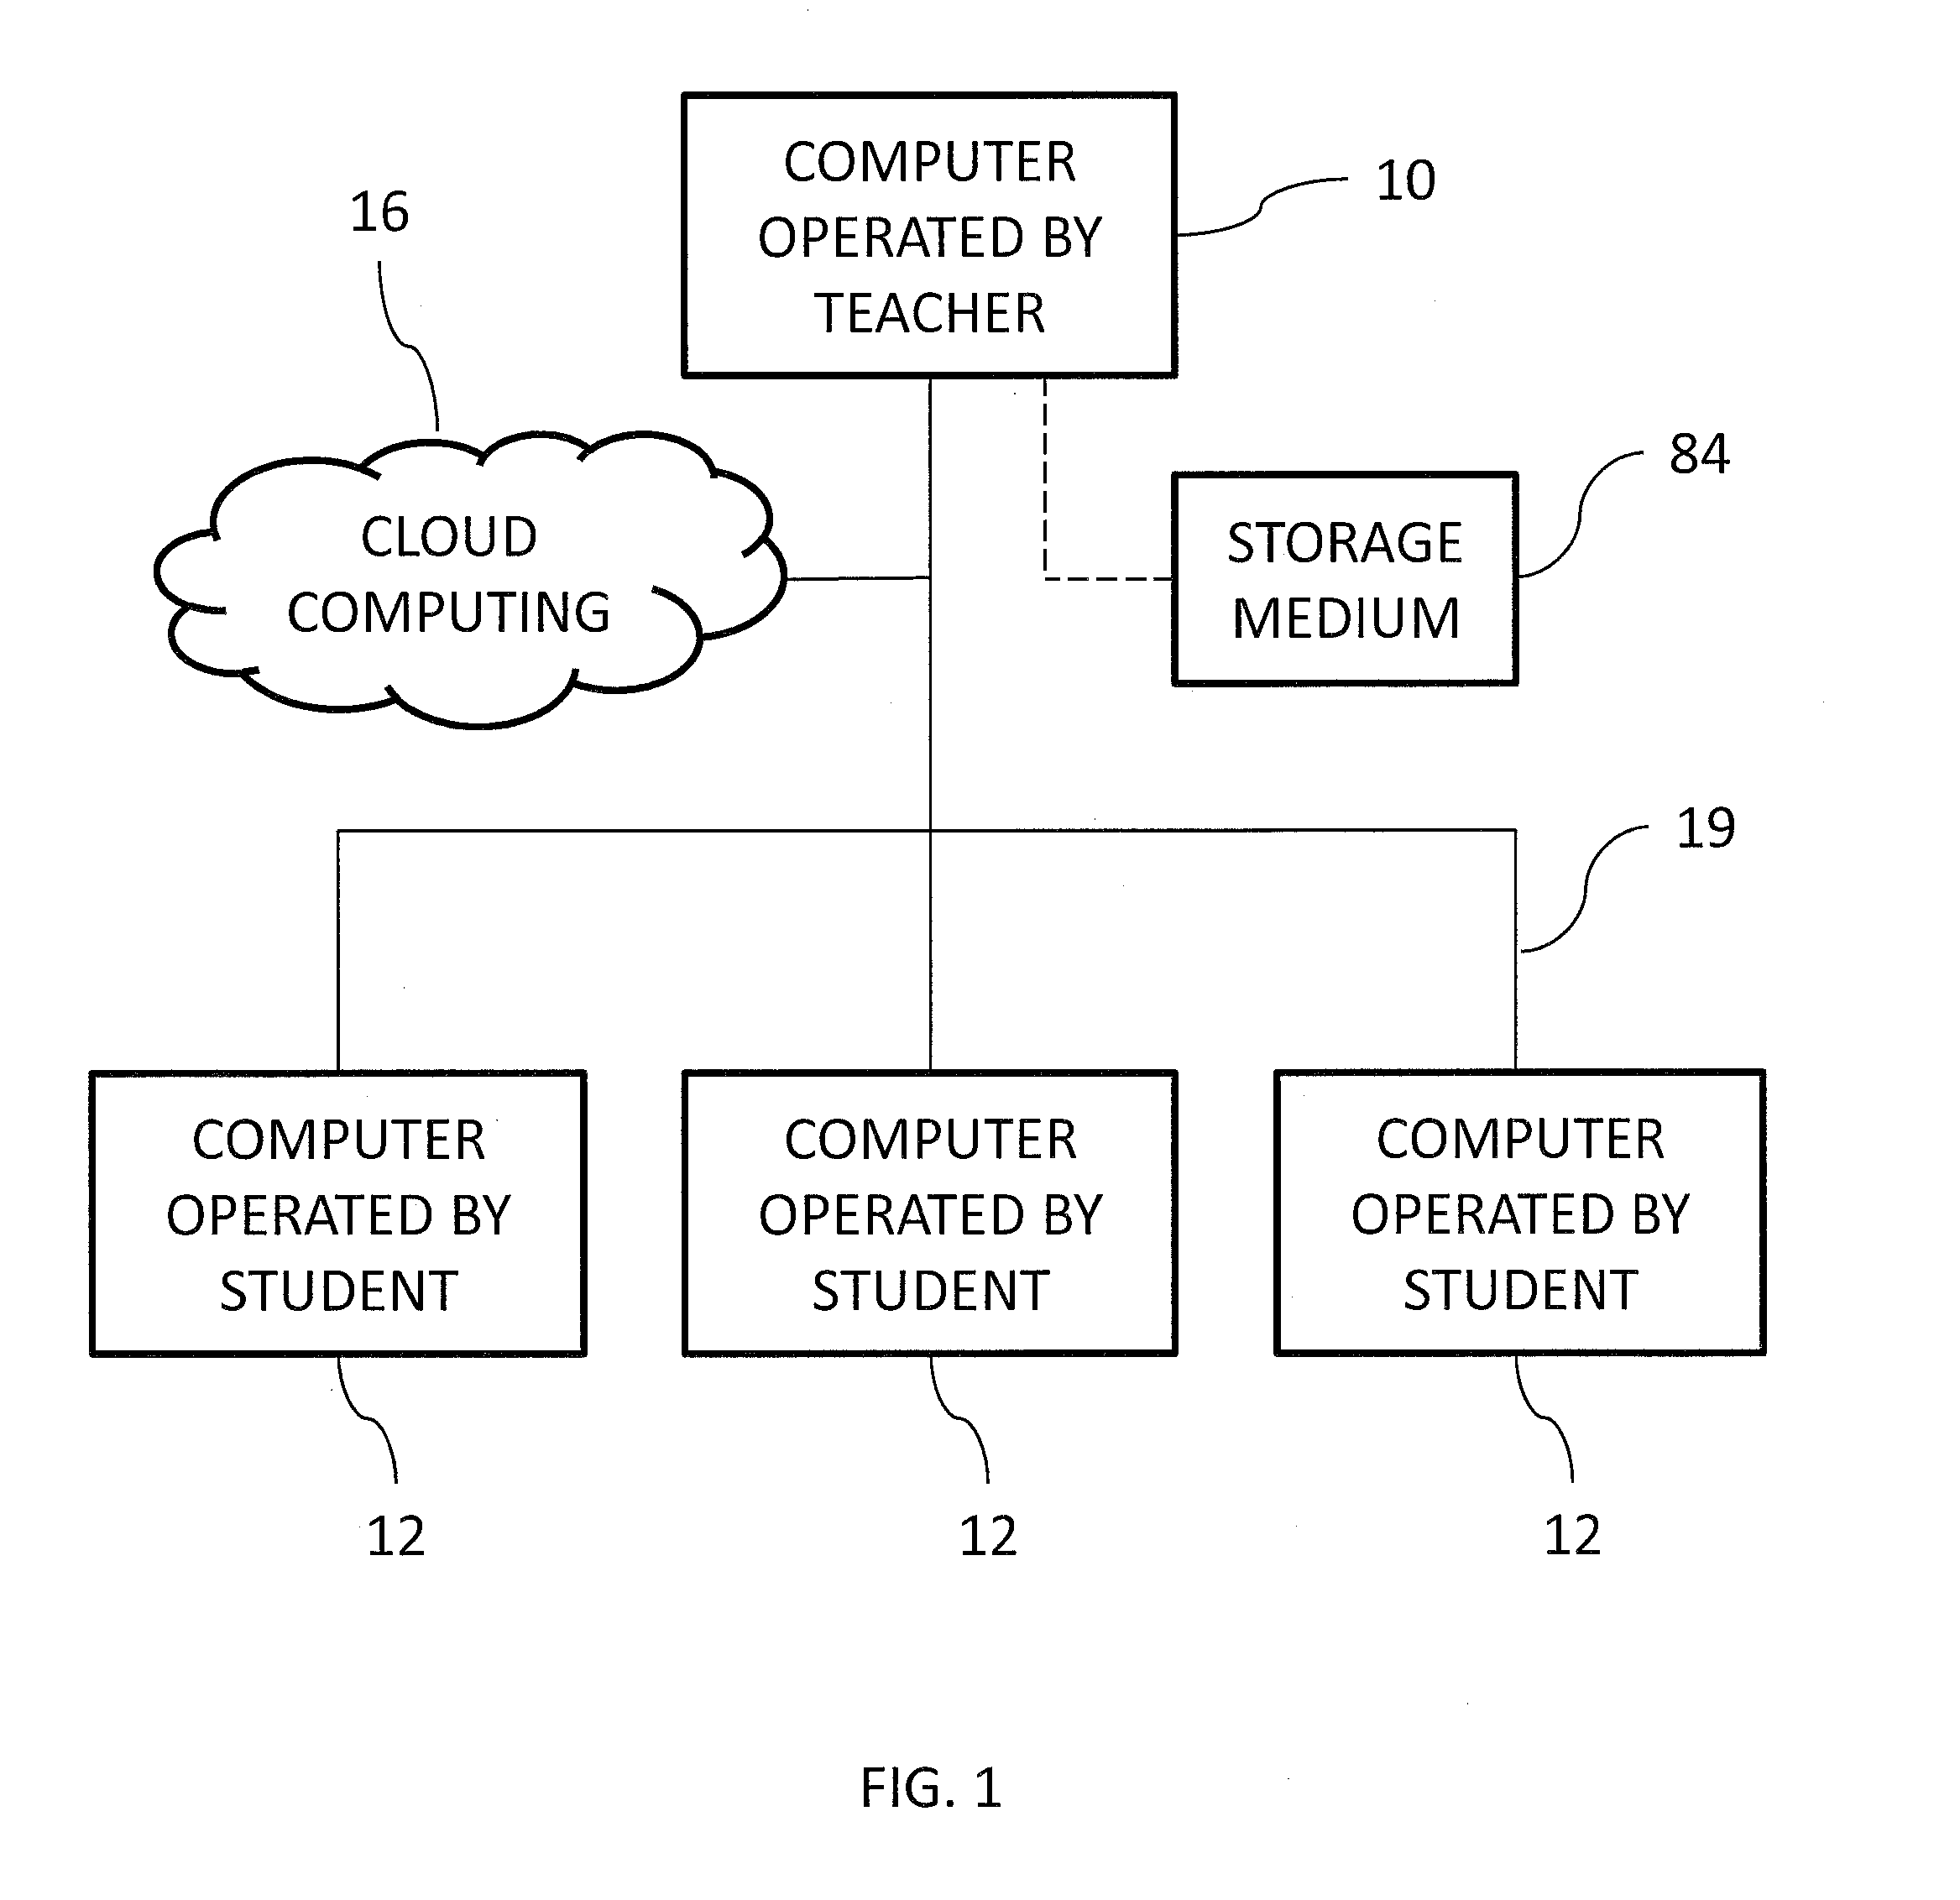 Computerized system and method for teaching, learning, and assessing the knowledge of stem principles